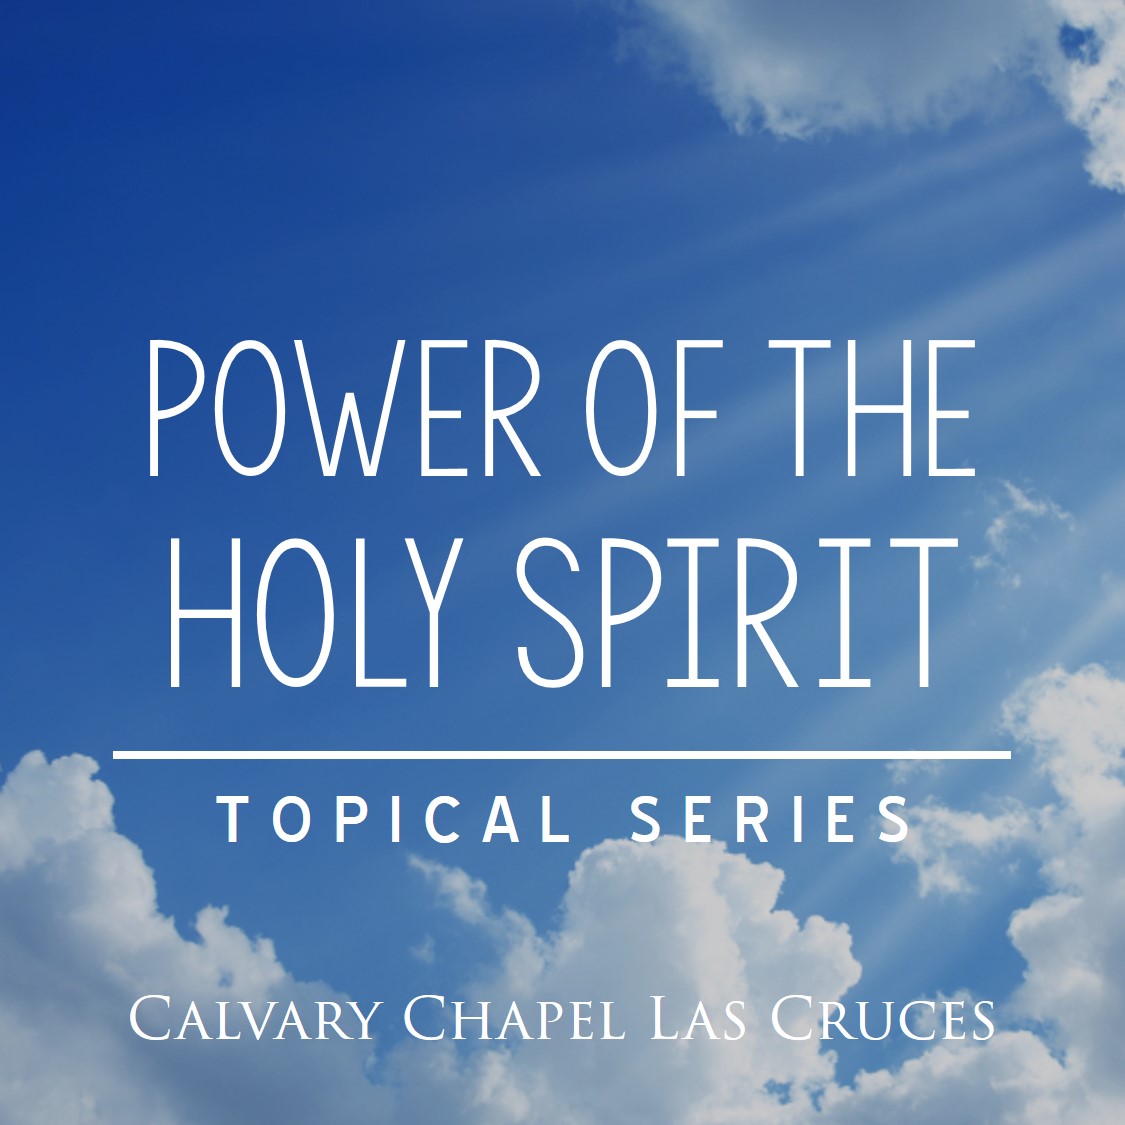 The Power of the Holy Spirit, Part 20